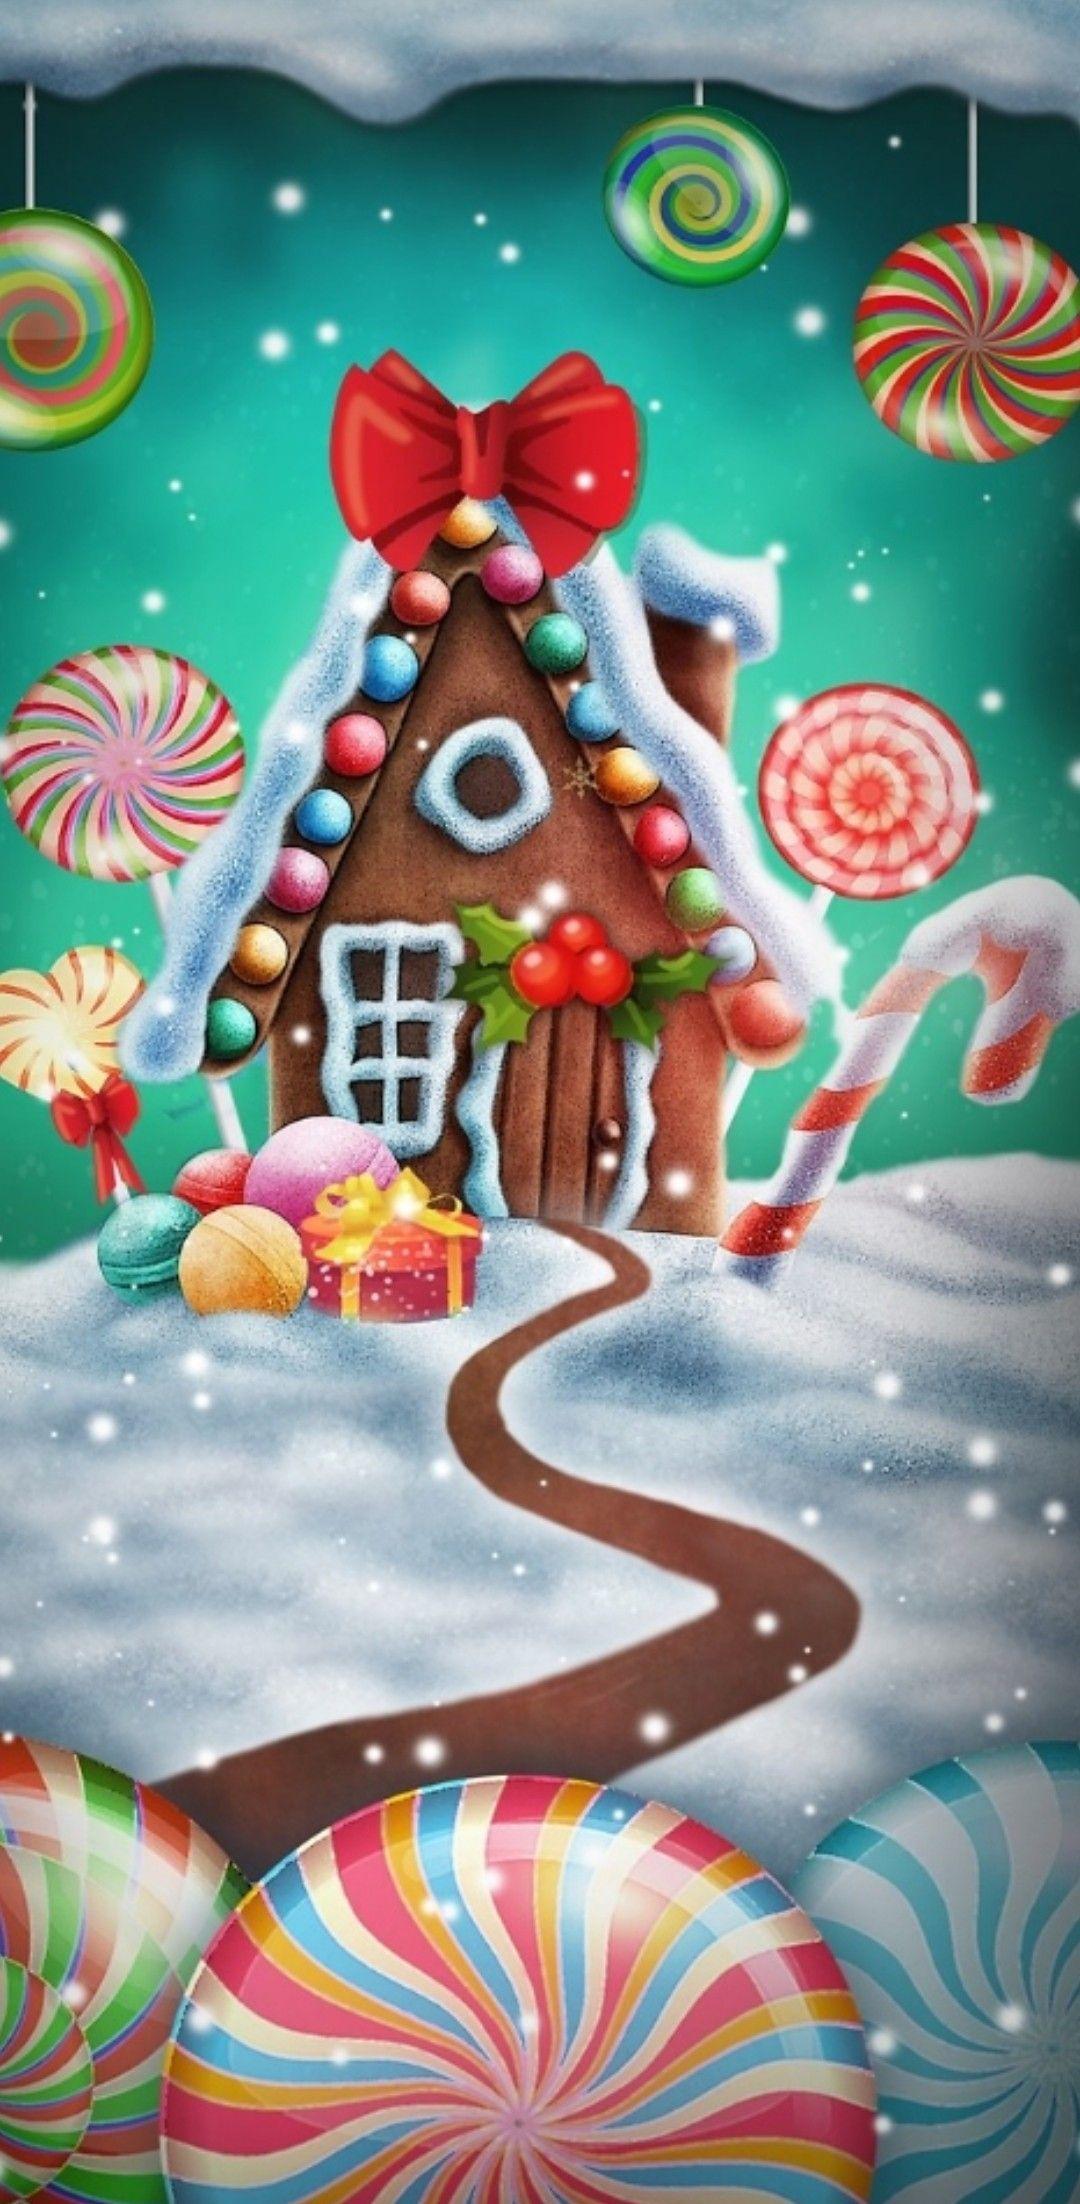 Gingerbread House Pictures  Download Free Images on Unsplash